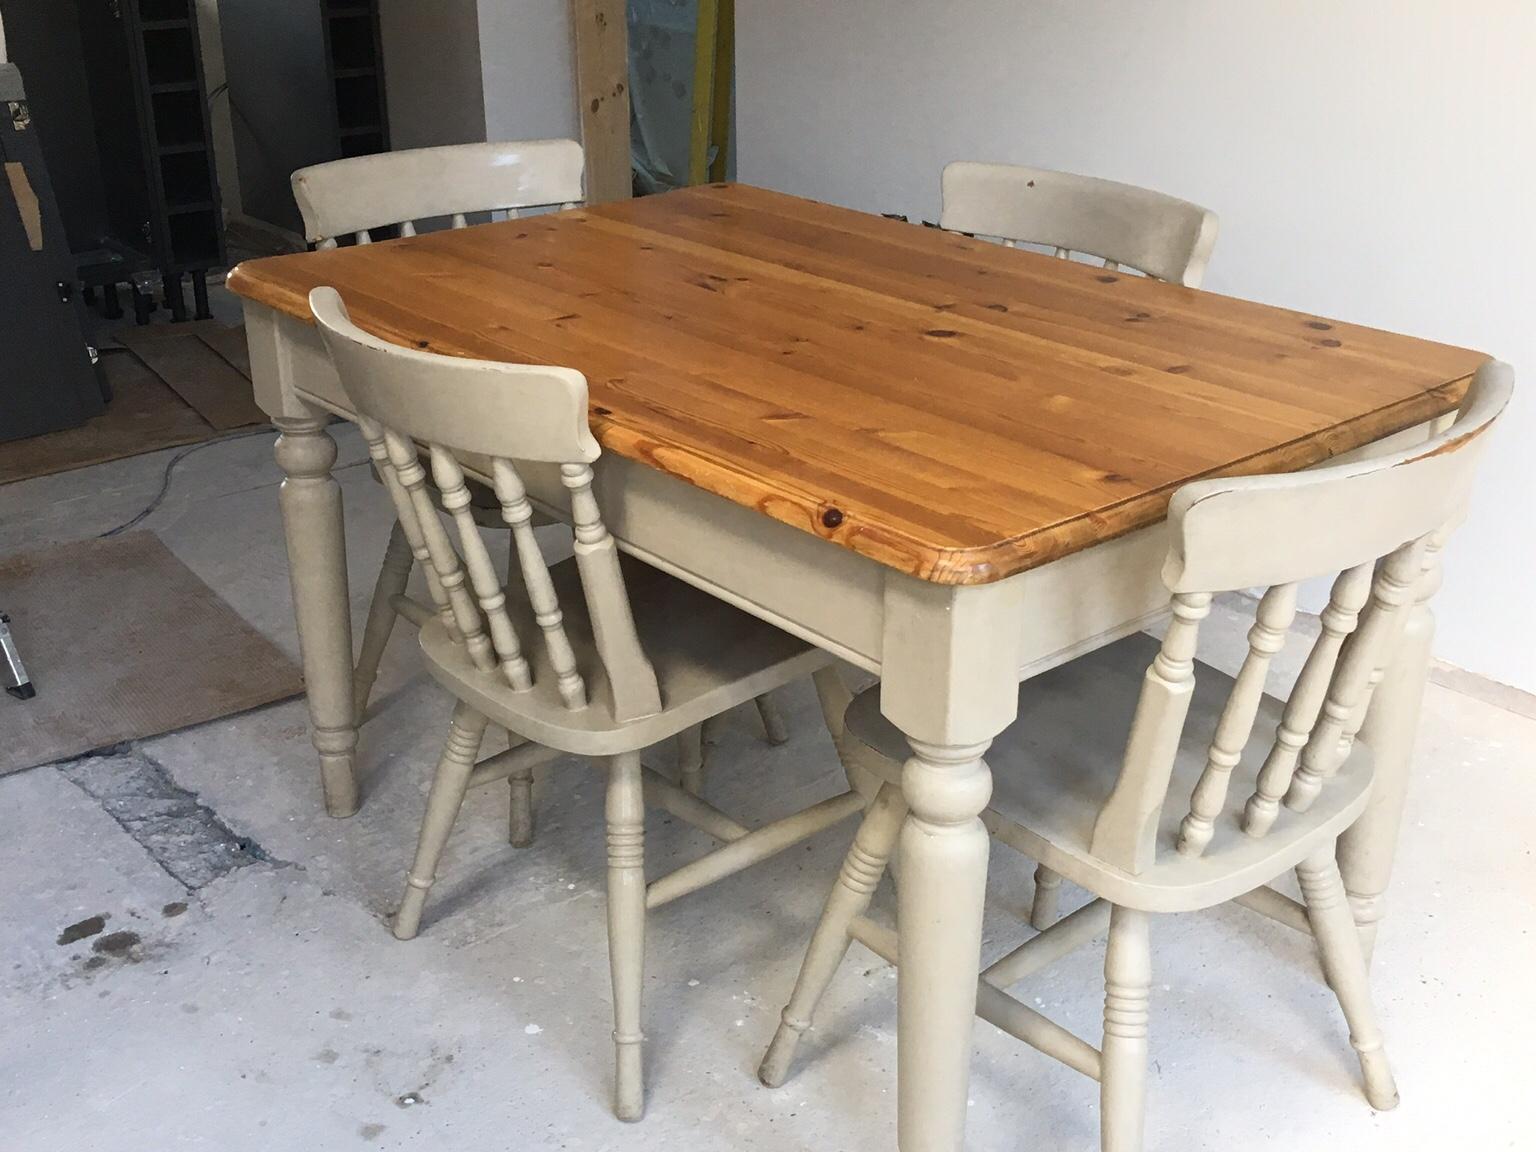 Shabby Chic Pine Table And Four Chairs In Dn10 Bassetlaw Fur 125